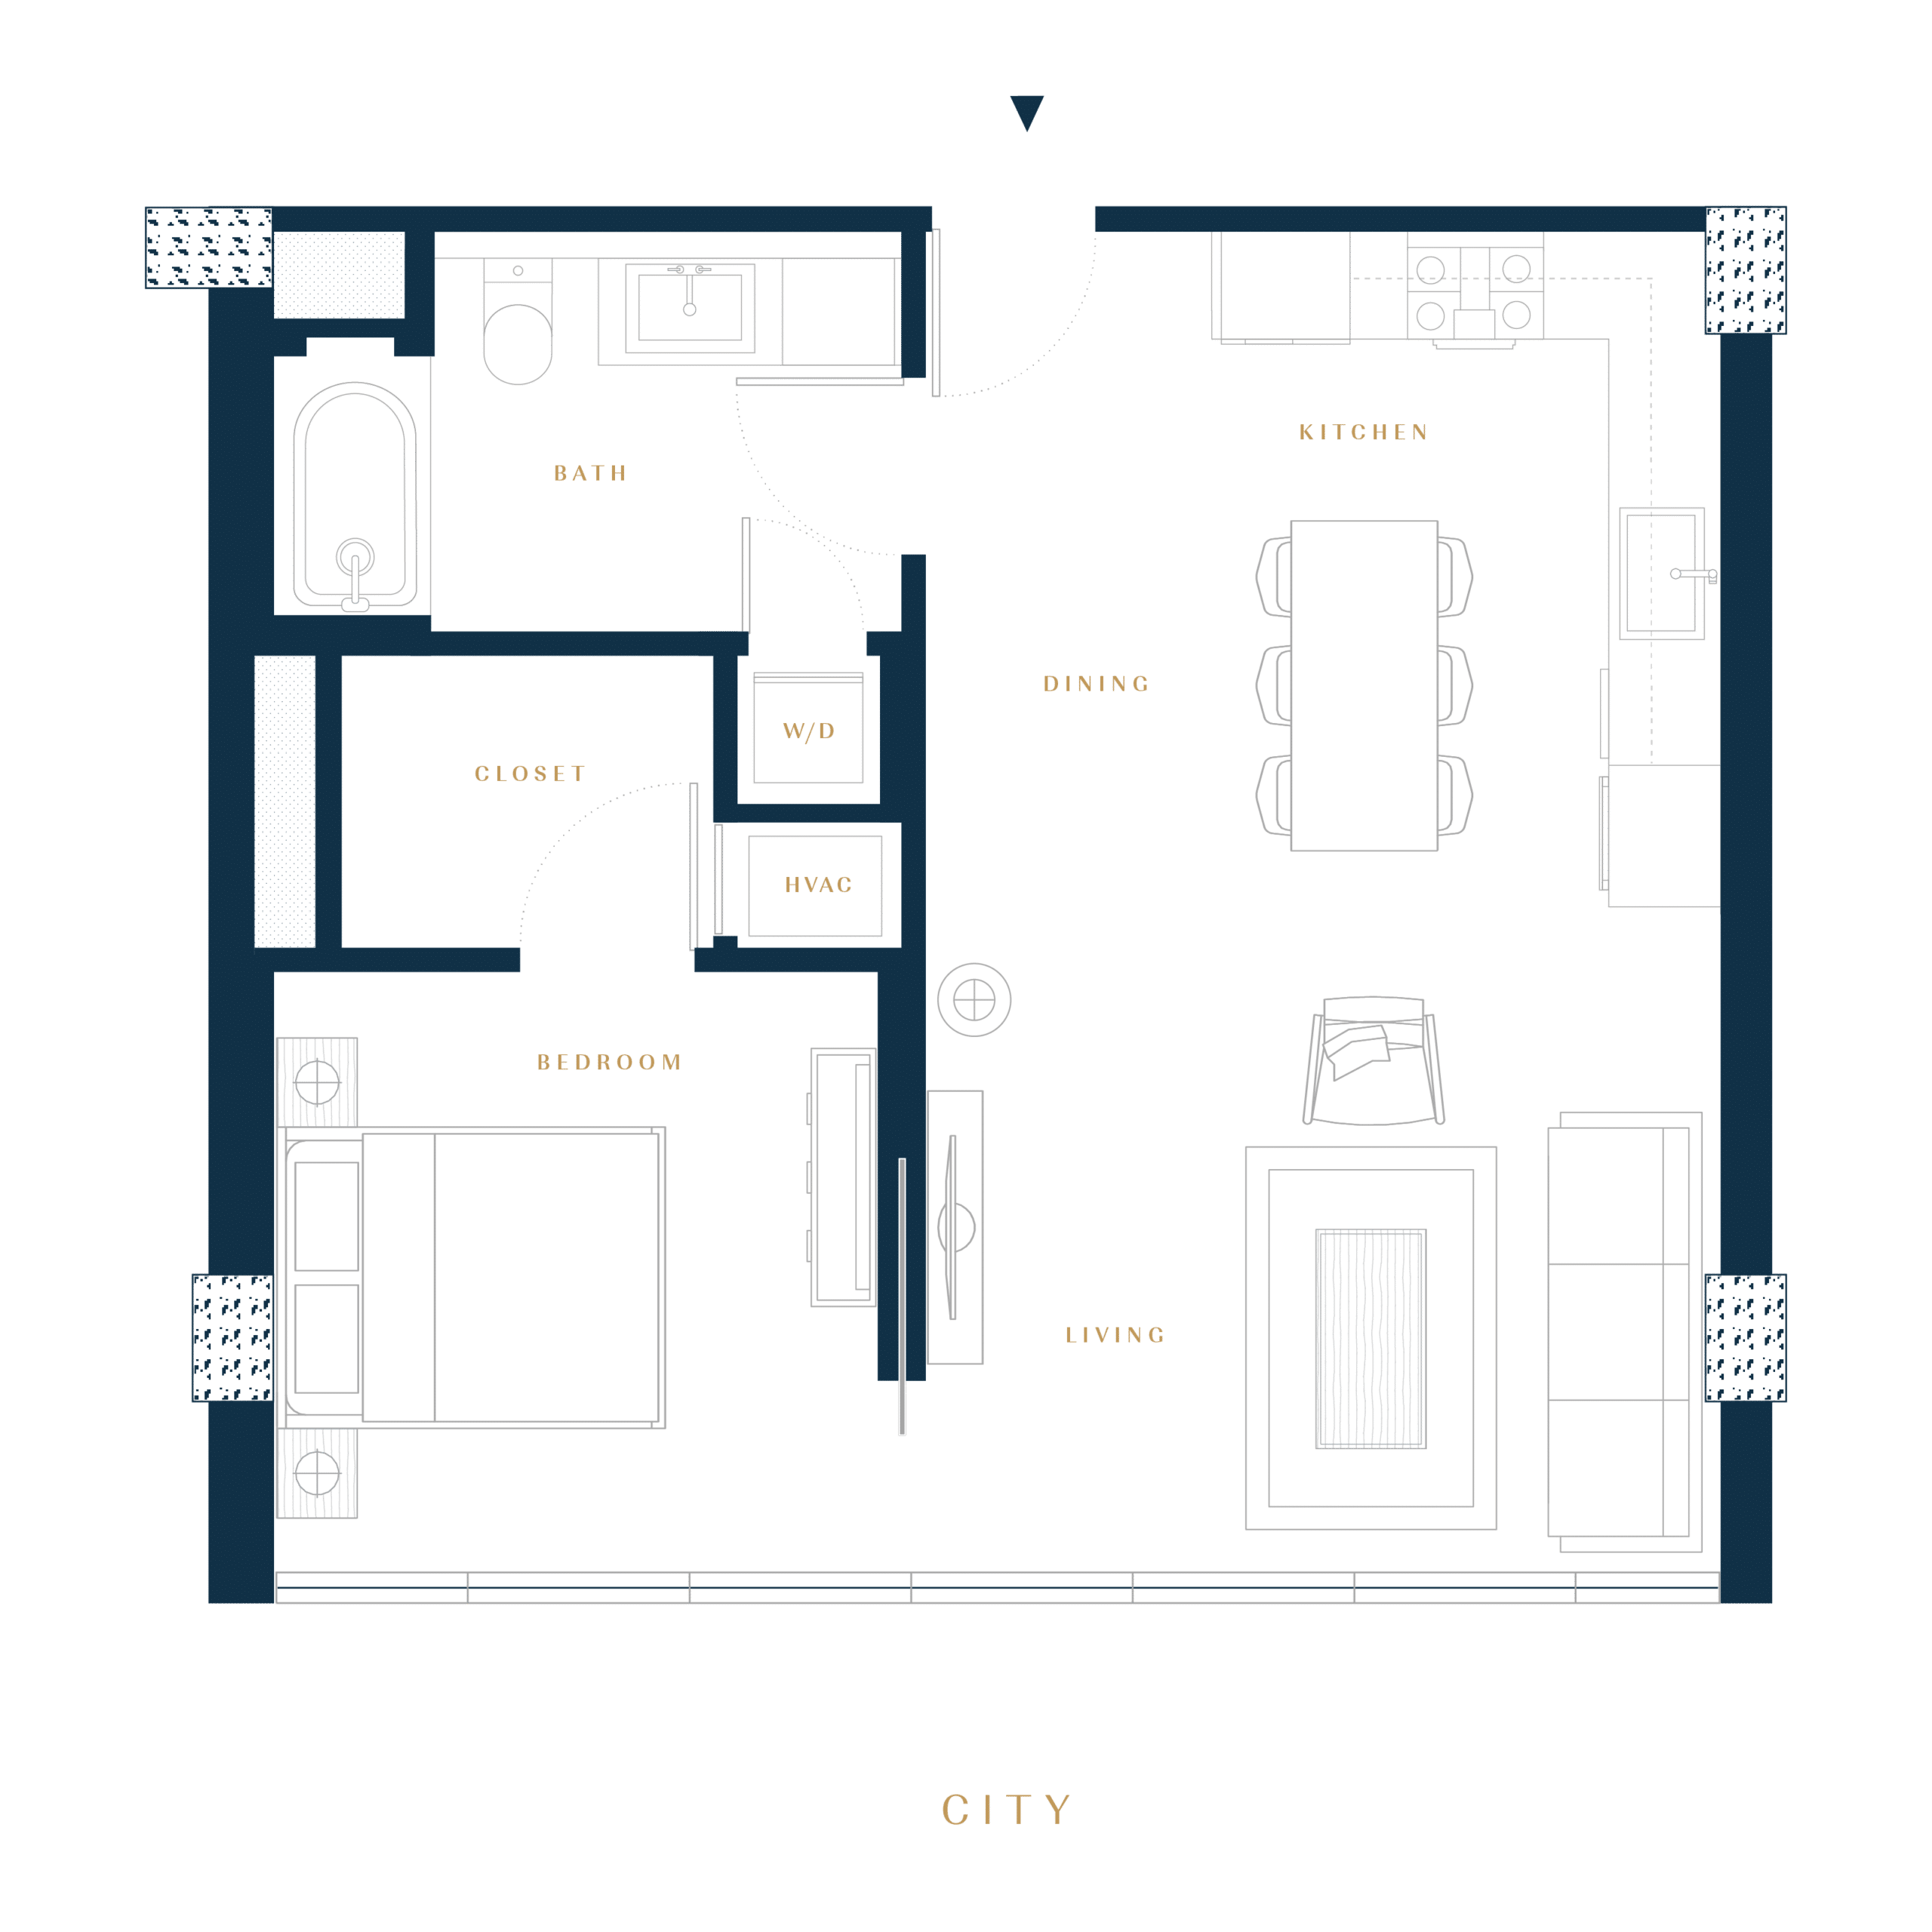 Residence 1F luxury condo floor plan in San Francisco Dogpatch